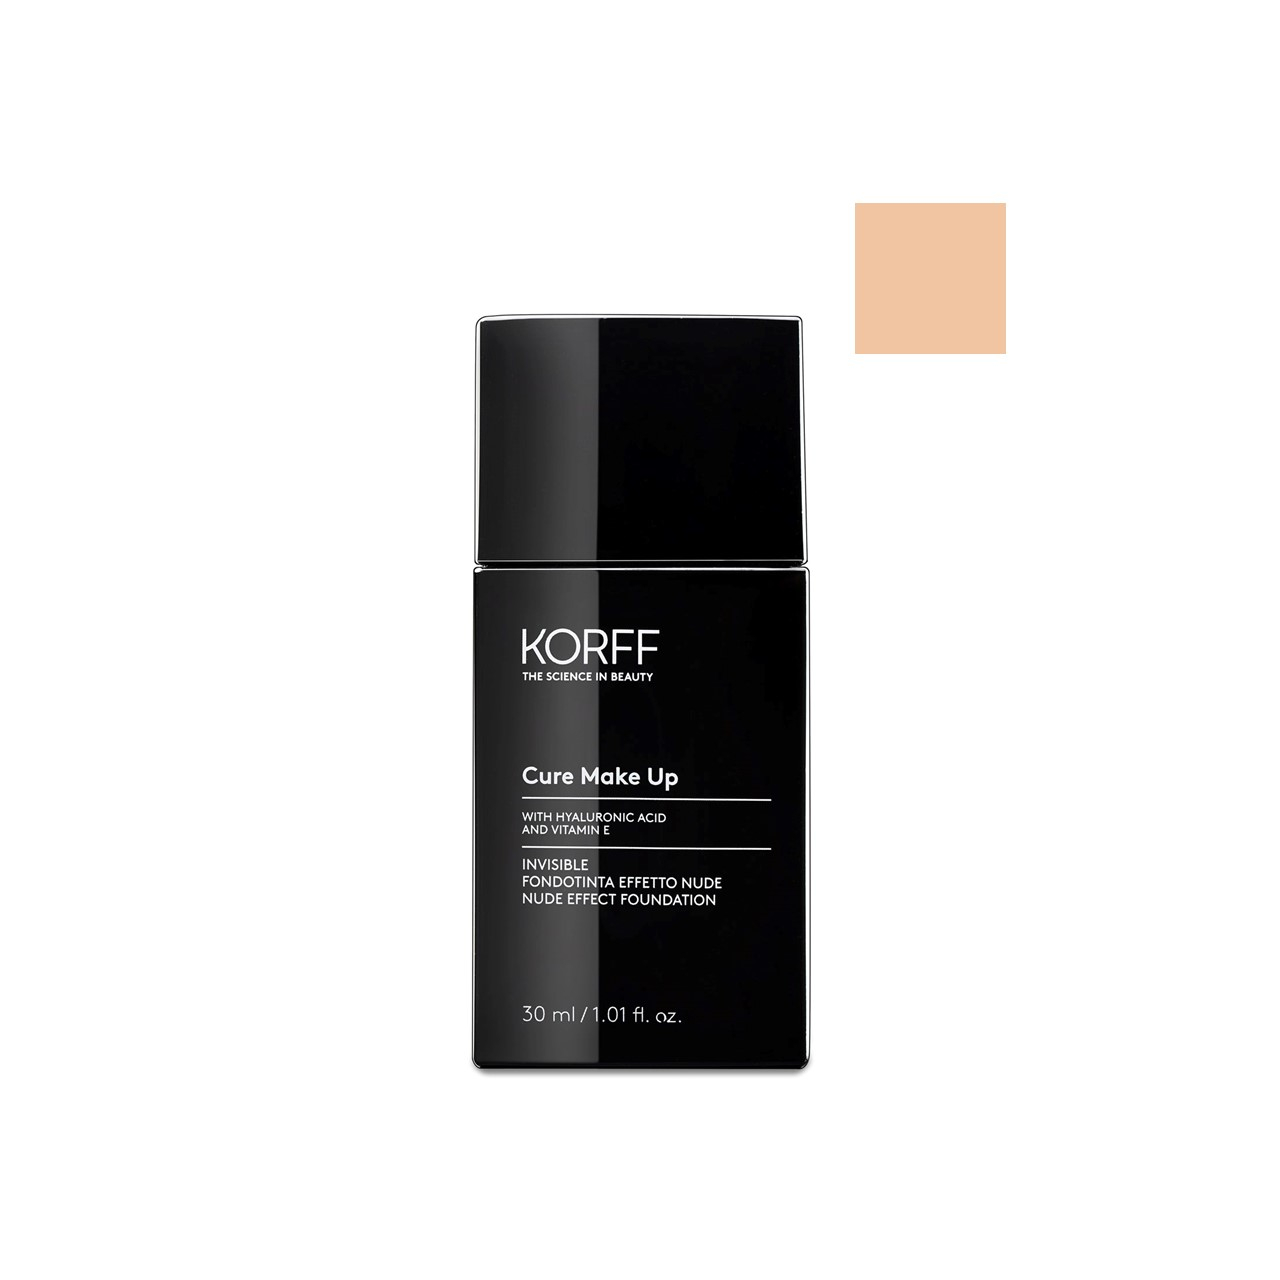 Korff Cure Make-Up Invisible Nude Effect Foundation 02 30ml (1.01 fl oz)